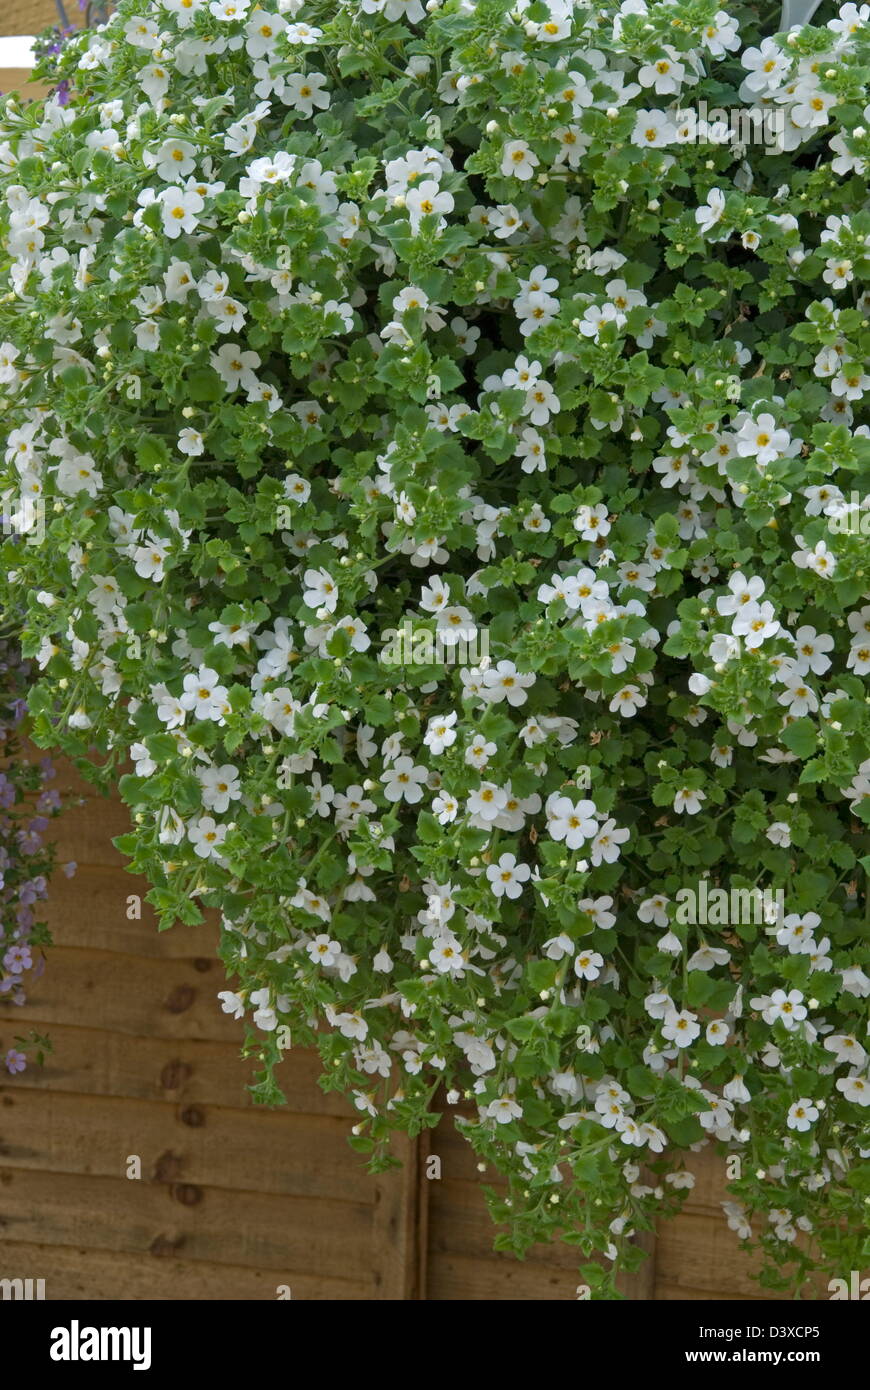 Bacopa 'Scopia' Gulliver White Date: 03.11.2008 Ref: ZB907 123496 0074 COMPULSORY CREDIT: Photos Horticultural/Photoshot Stock Photo